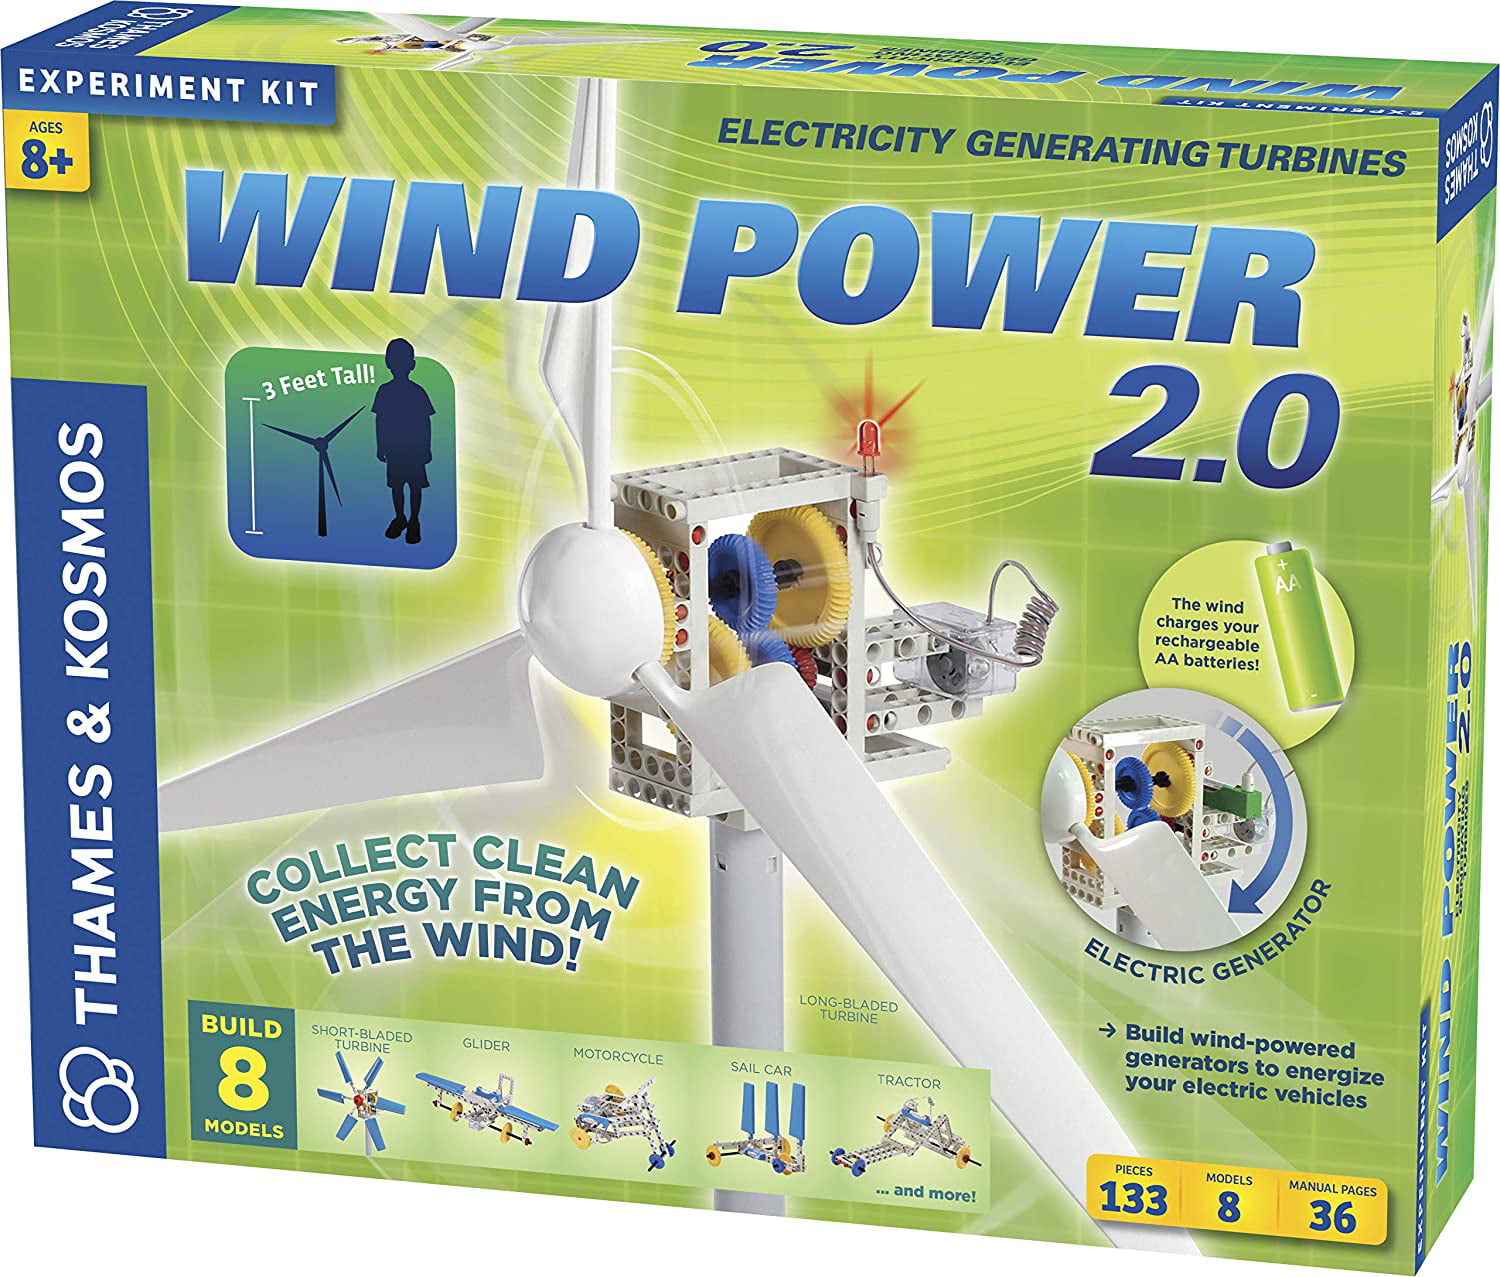 Learn About Renewable Energy & Power a Small Model Car Thames & Kosmos Wind Power V4.0 STEM Experiment Kit Build a 3ft Wind Turbine to Generate Electricity Weatherproof for Outdoor Use